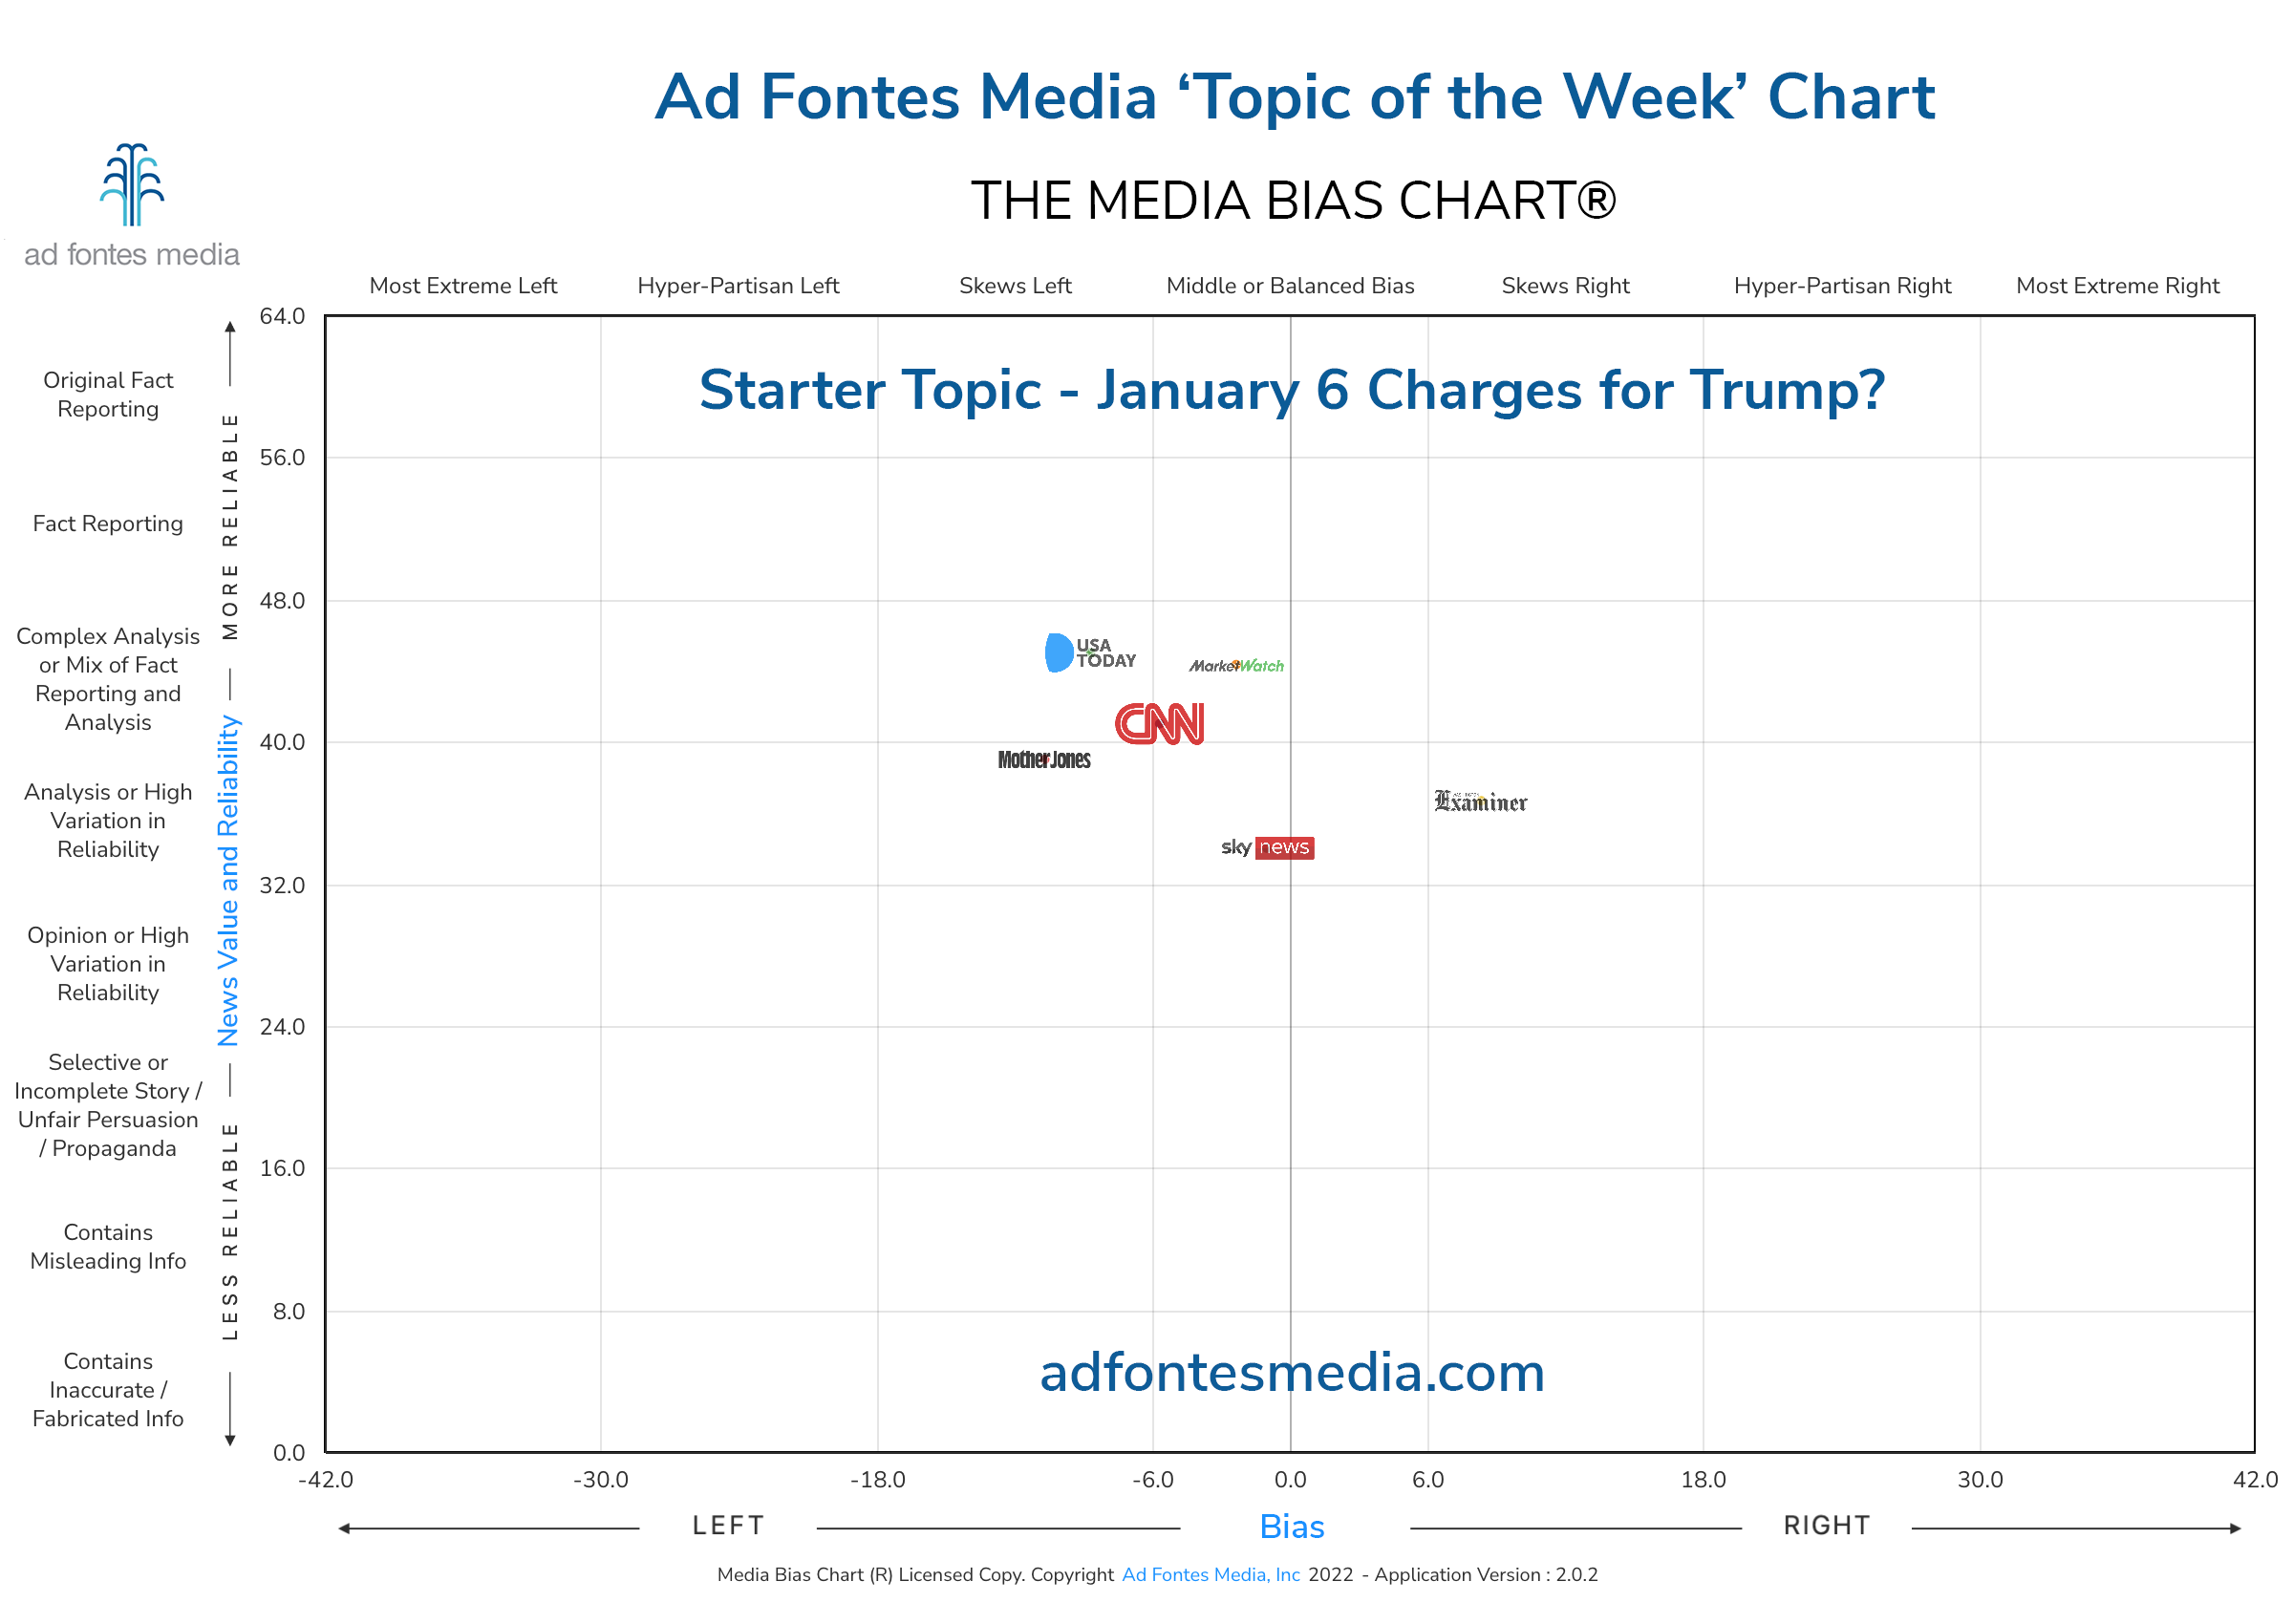 Scores of the January 6 Charges for Trump? articles on the chart